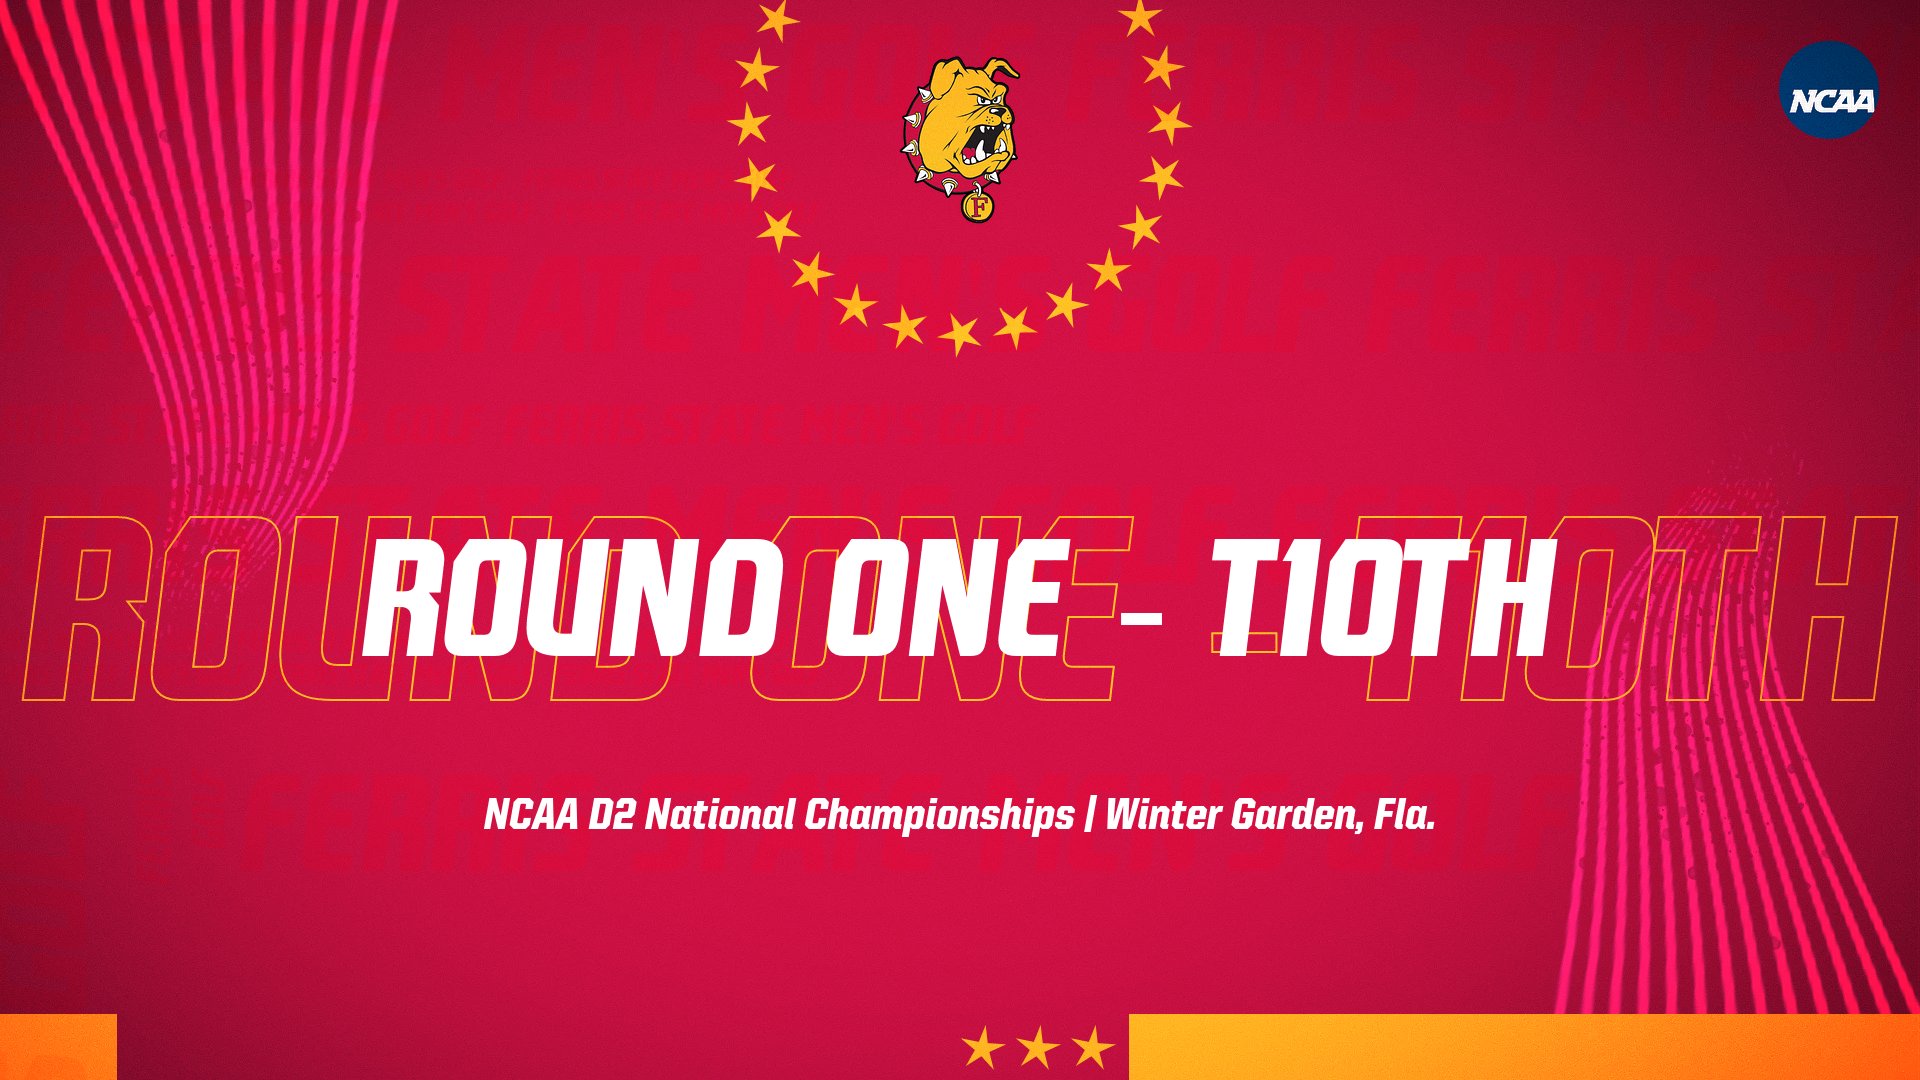 Ferris State Men's Golf Tied For 10th Overall After First Round At NCAA D2 National Championships